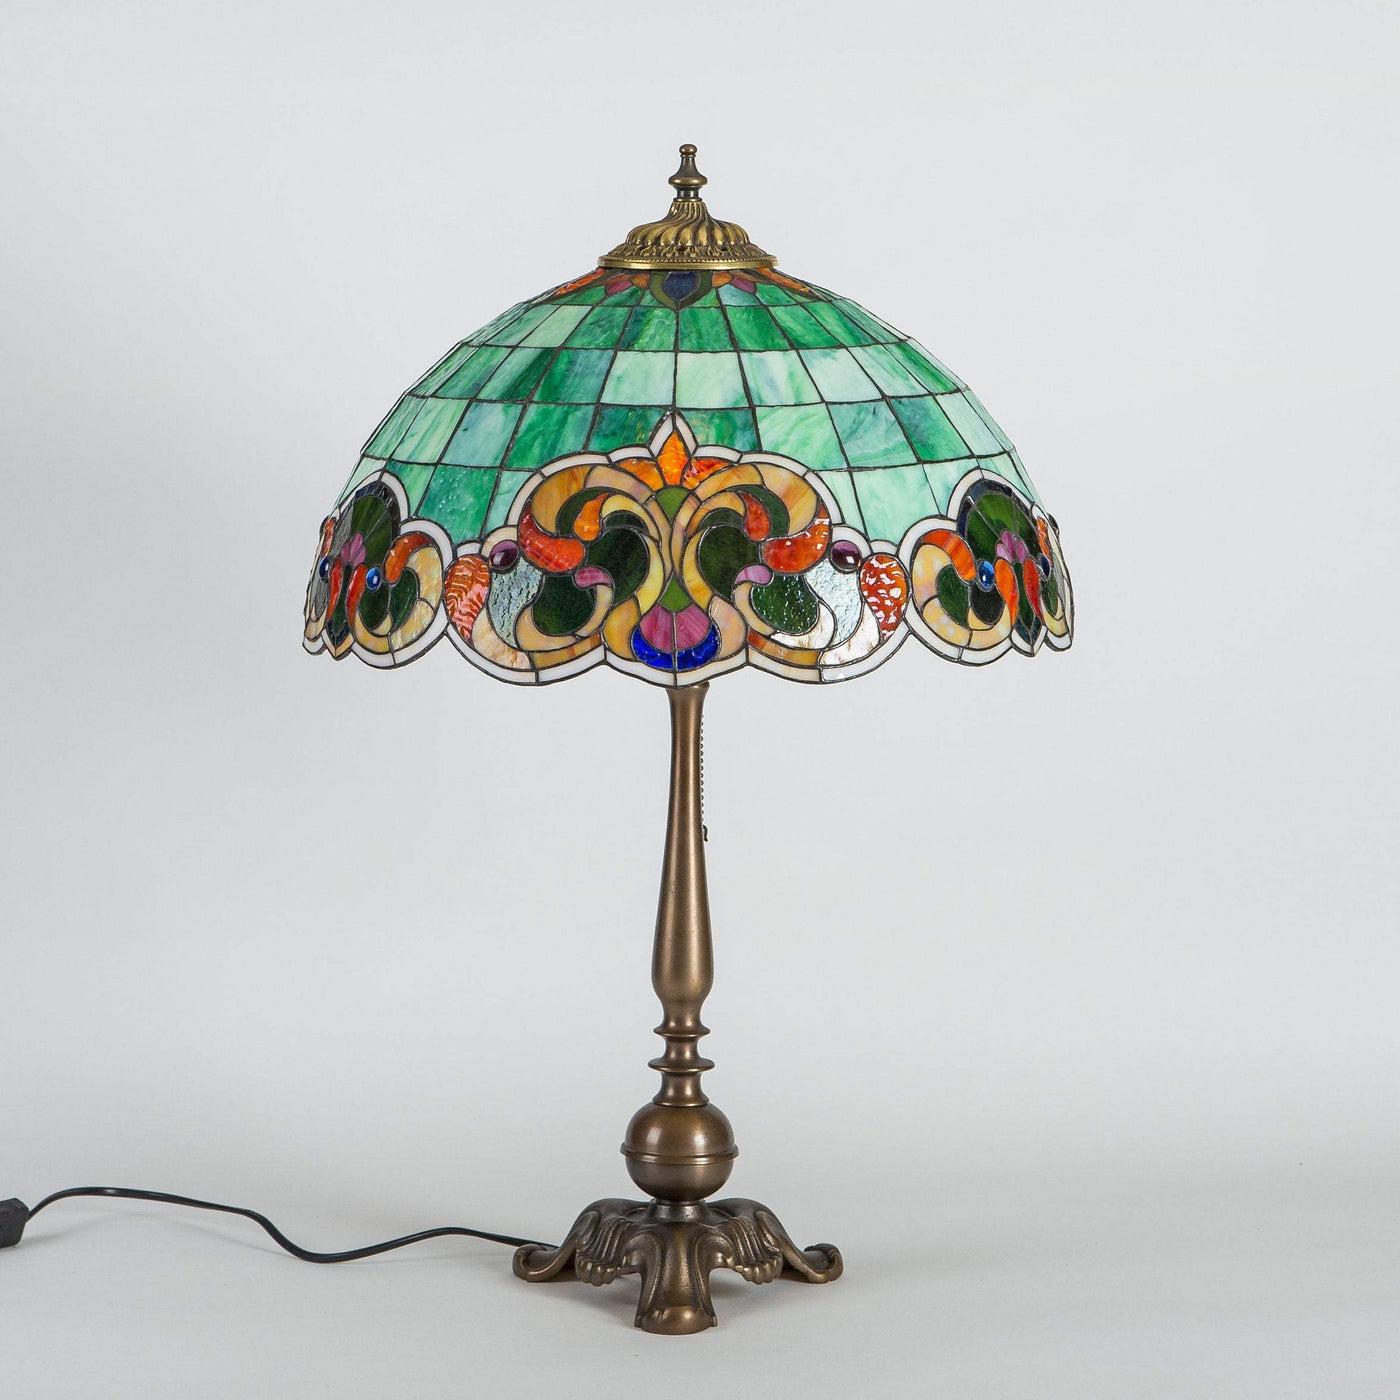 Stained glass green lamp in Tiffany style with colourful markings